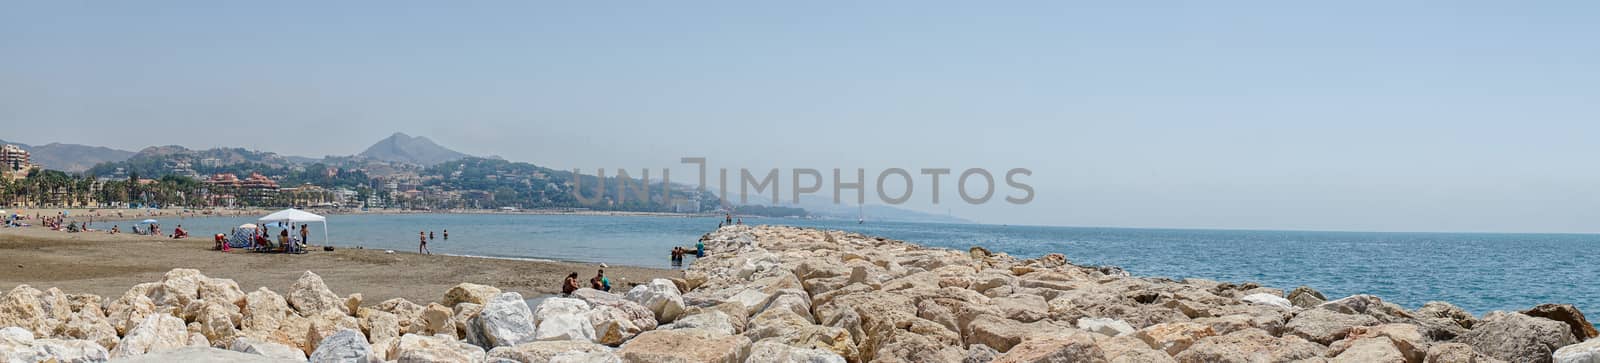 Panoramic view of the ocean at Malagueta beach with rocks at Malaga, Spain, Europe on a clear sky morning